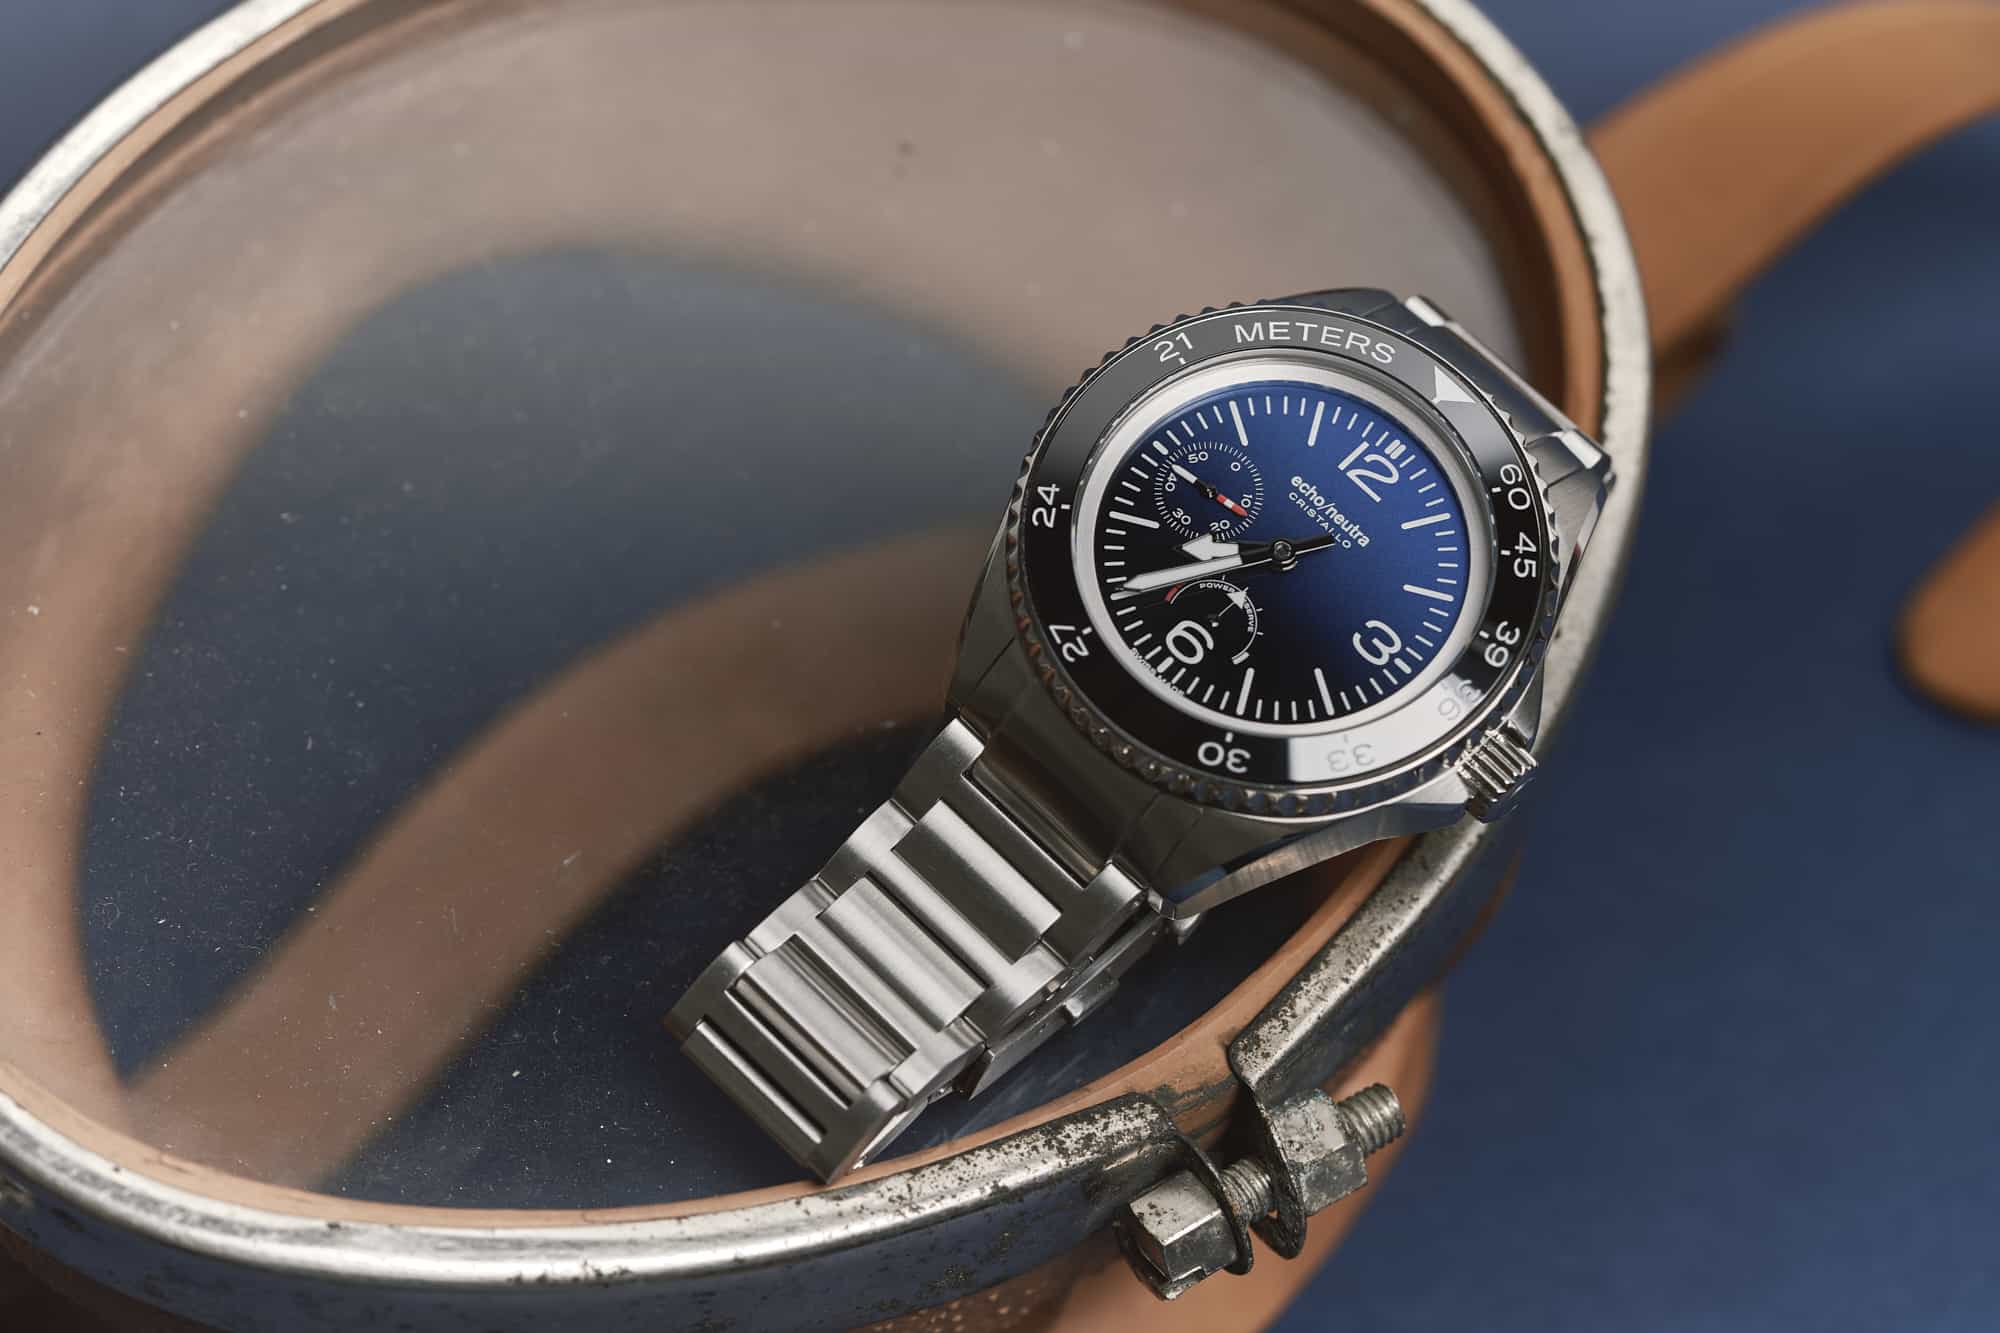 Hands-On: Professional Desk Diving with the echo/neutra Cristallo Professional Diver